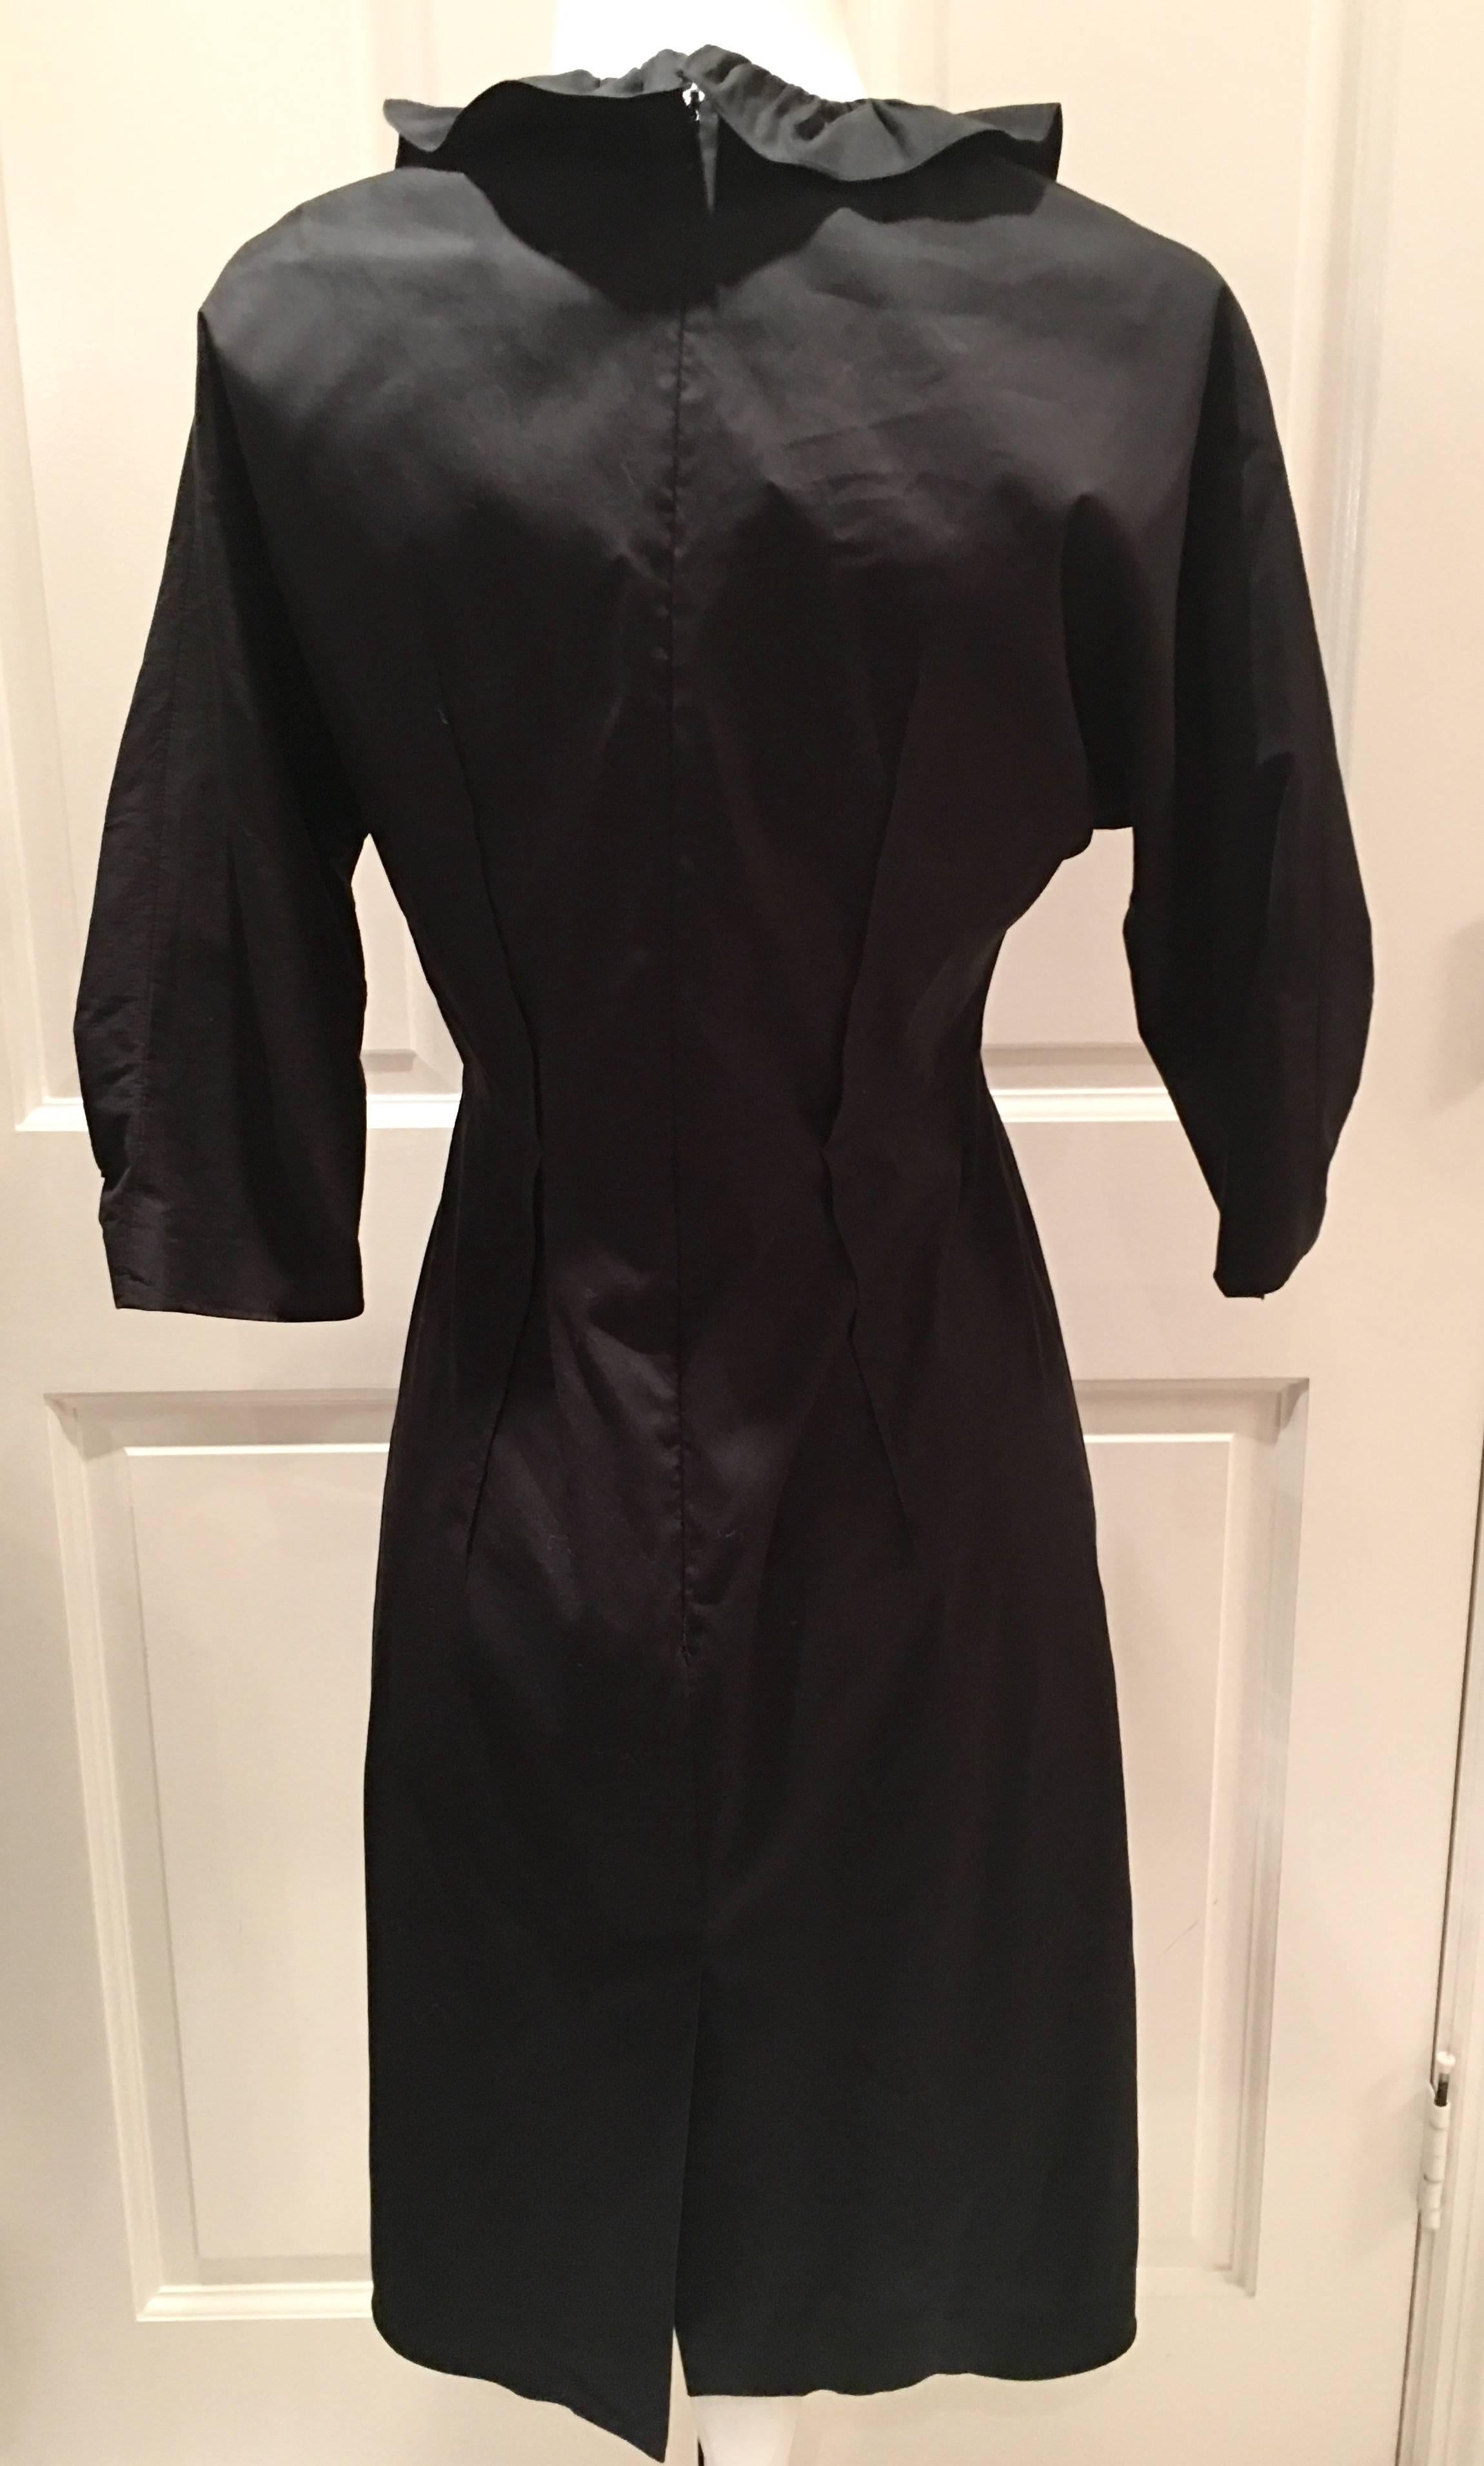 Classic Prada Milano 2010 cotton blend 3/4 inch ruched sleeve knee length dress. Ruffle flap v-neck detail, gathered bodice front and back for best fit with elastane content for variable fit. Back zipper and hook closure with a 10" inch back